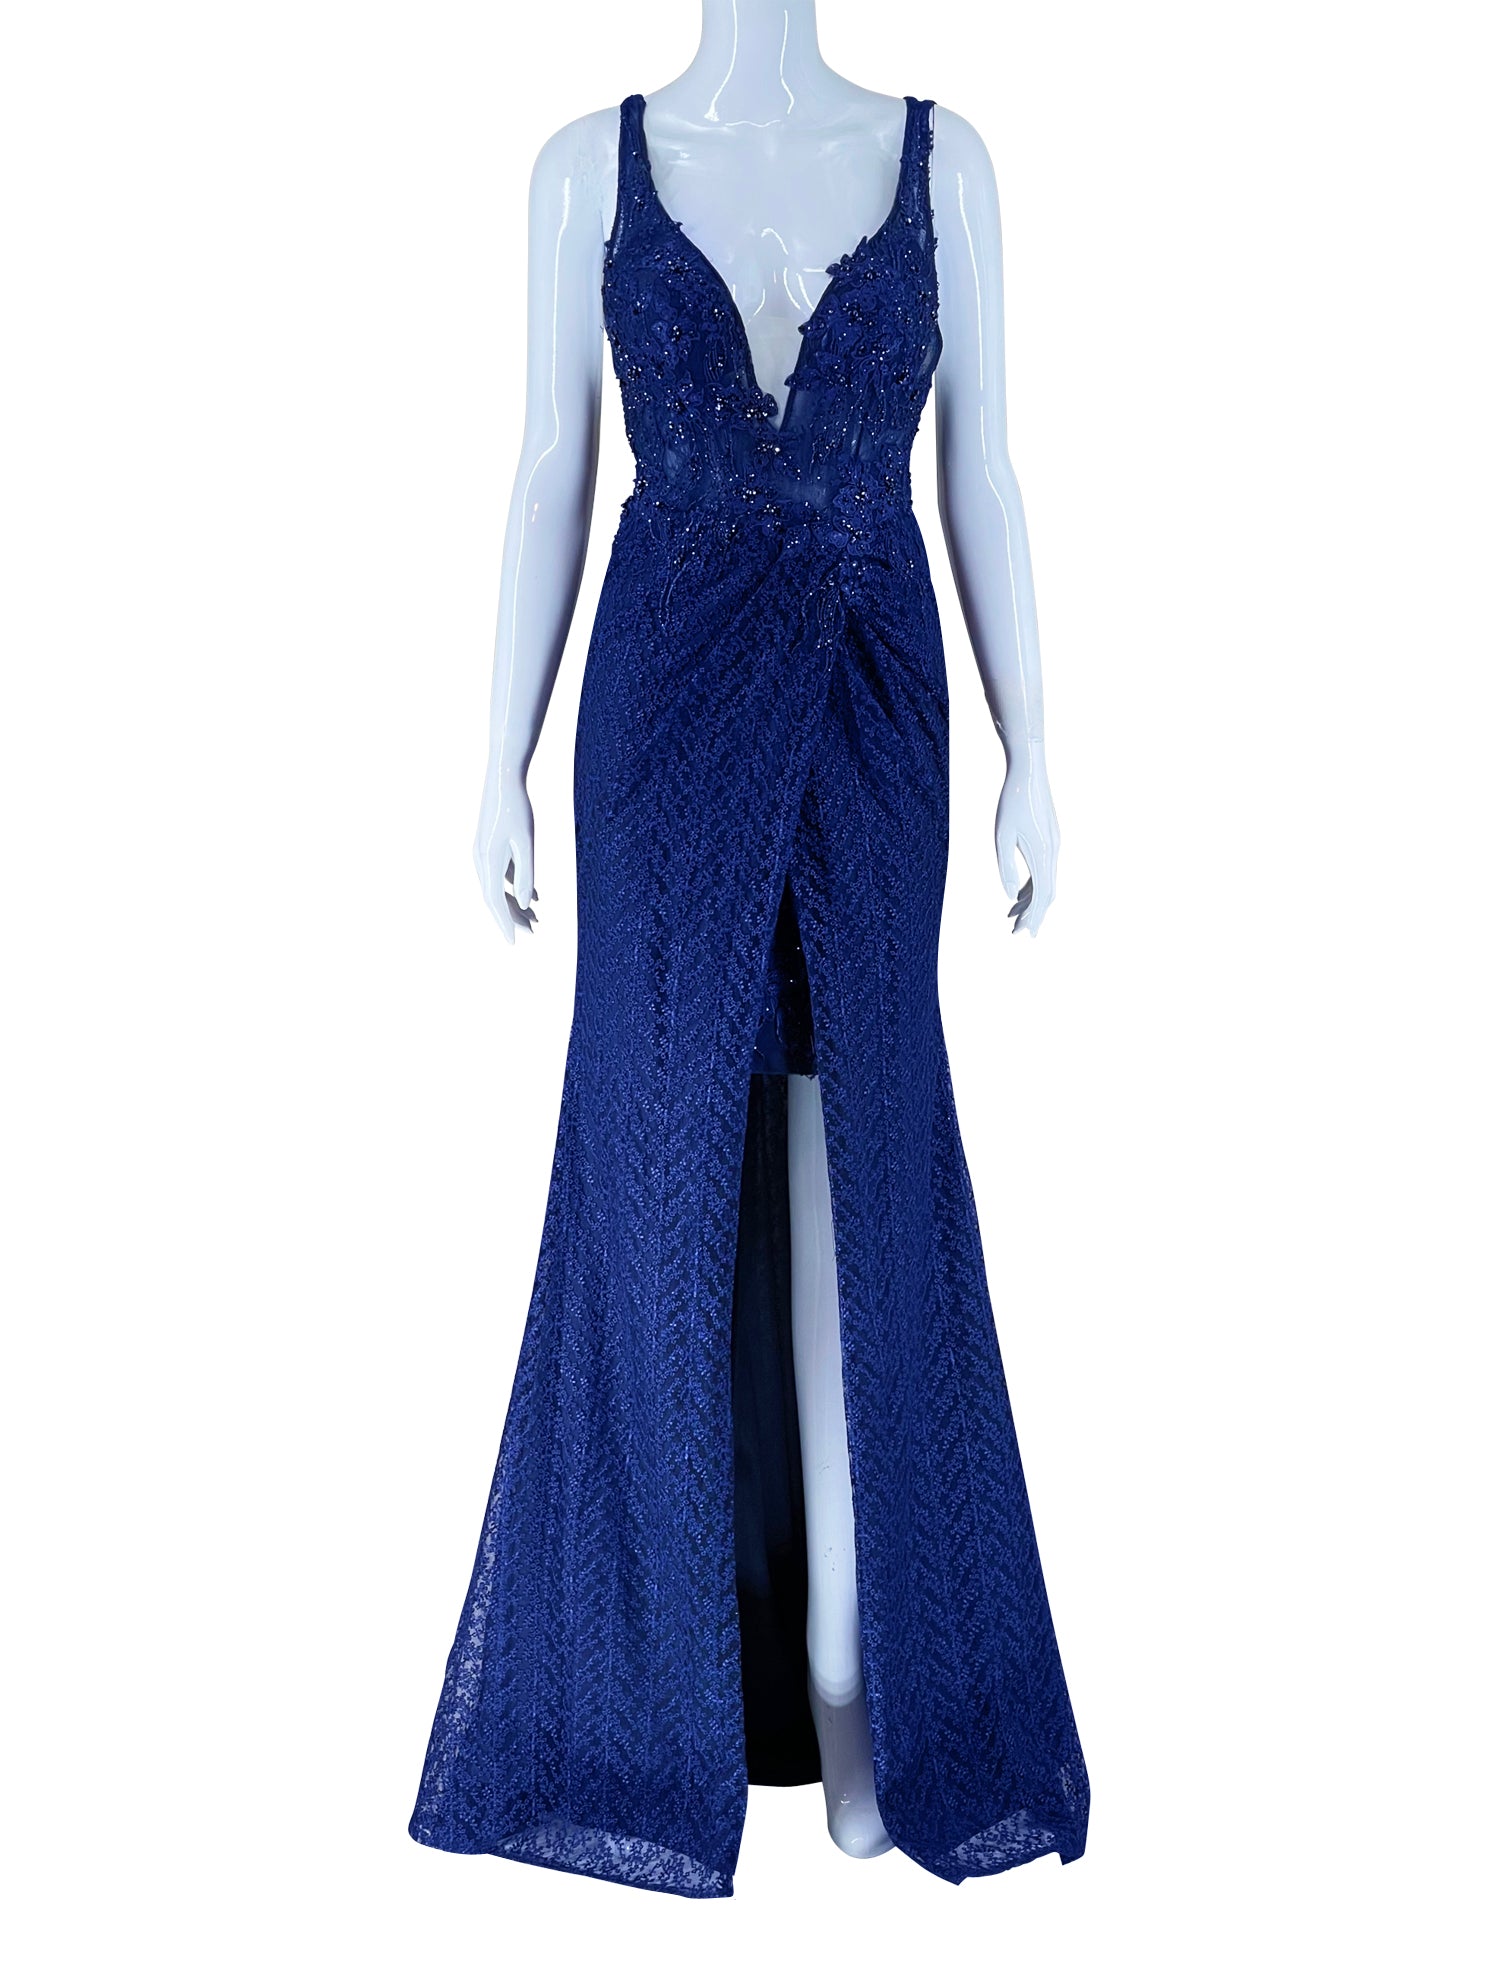 Ieena Mac Duggal Embellished Lace Evening Gown